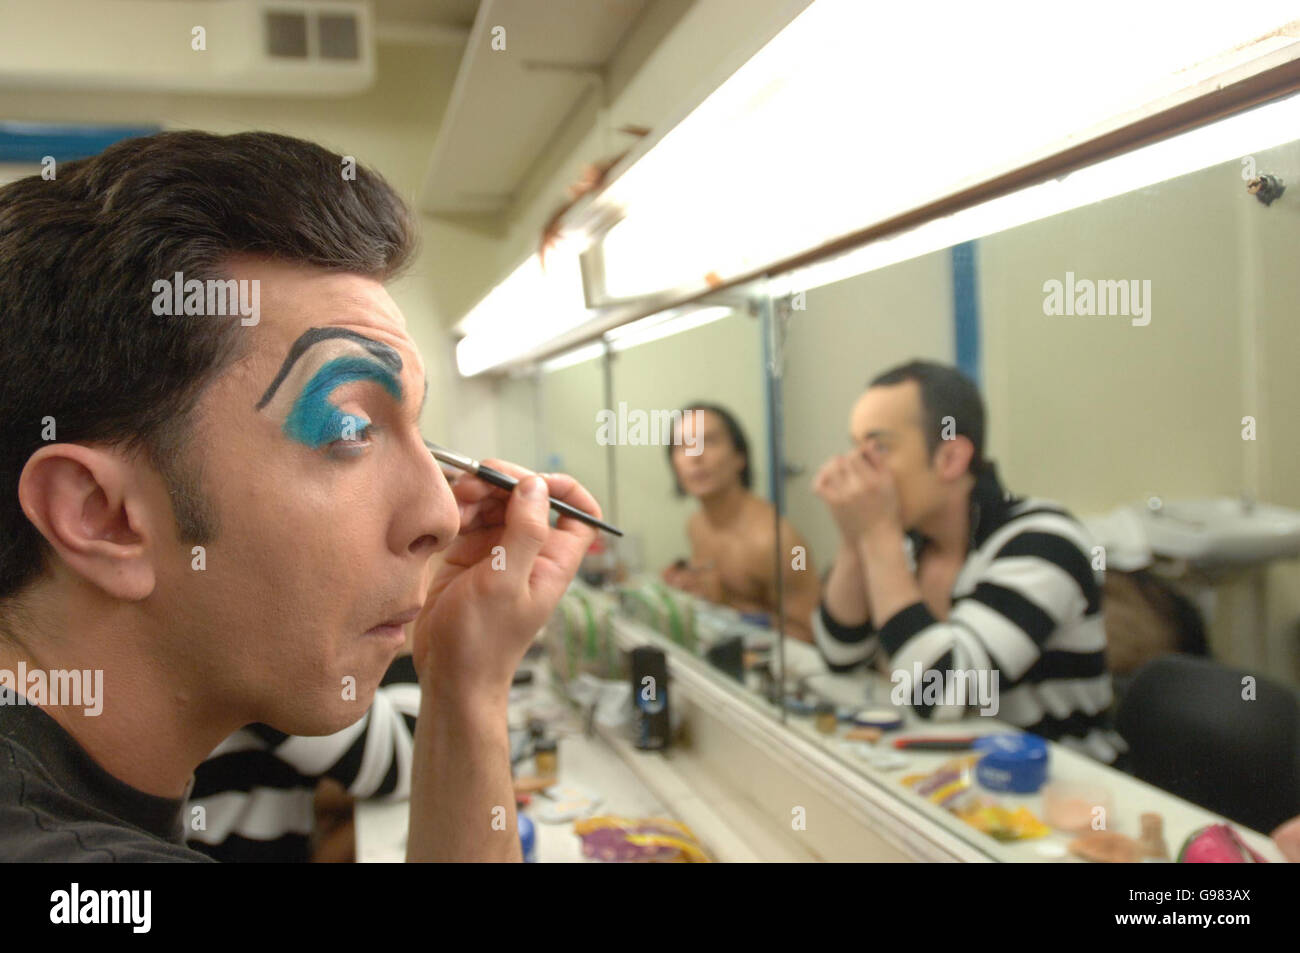 Scott Weber (AKA 'Ludmila Beaulemova/Jaques d'Ambrosia') prepares for a dress rehearsal with 'Les Ballets Trockadero de Monte Carlo', an all-male ballet company from New York City who are performing their trademark parodies of classical ballets in London for the first time in five years, at the Peacock Theatre, central London, Tuesday 21 March 2006. PRESS ASSOCIATION Photo. Photo credit should read: Steve Parsons/PA Stock Photo